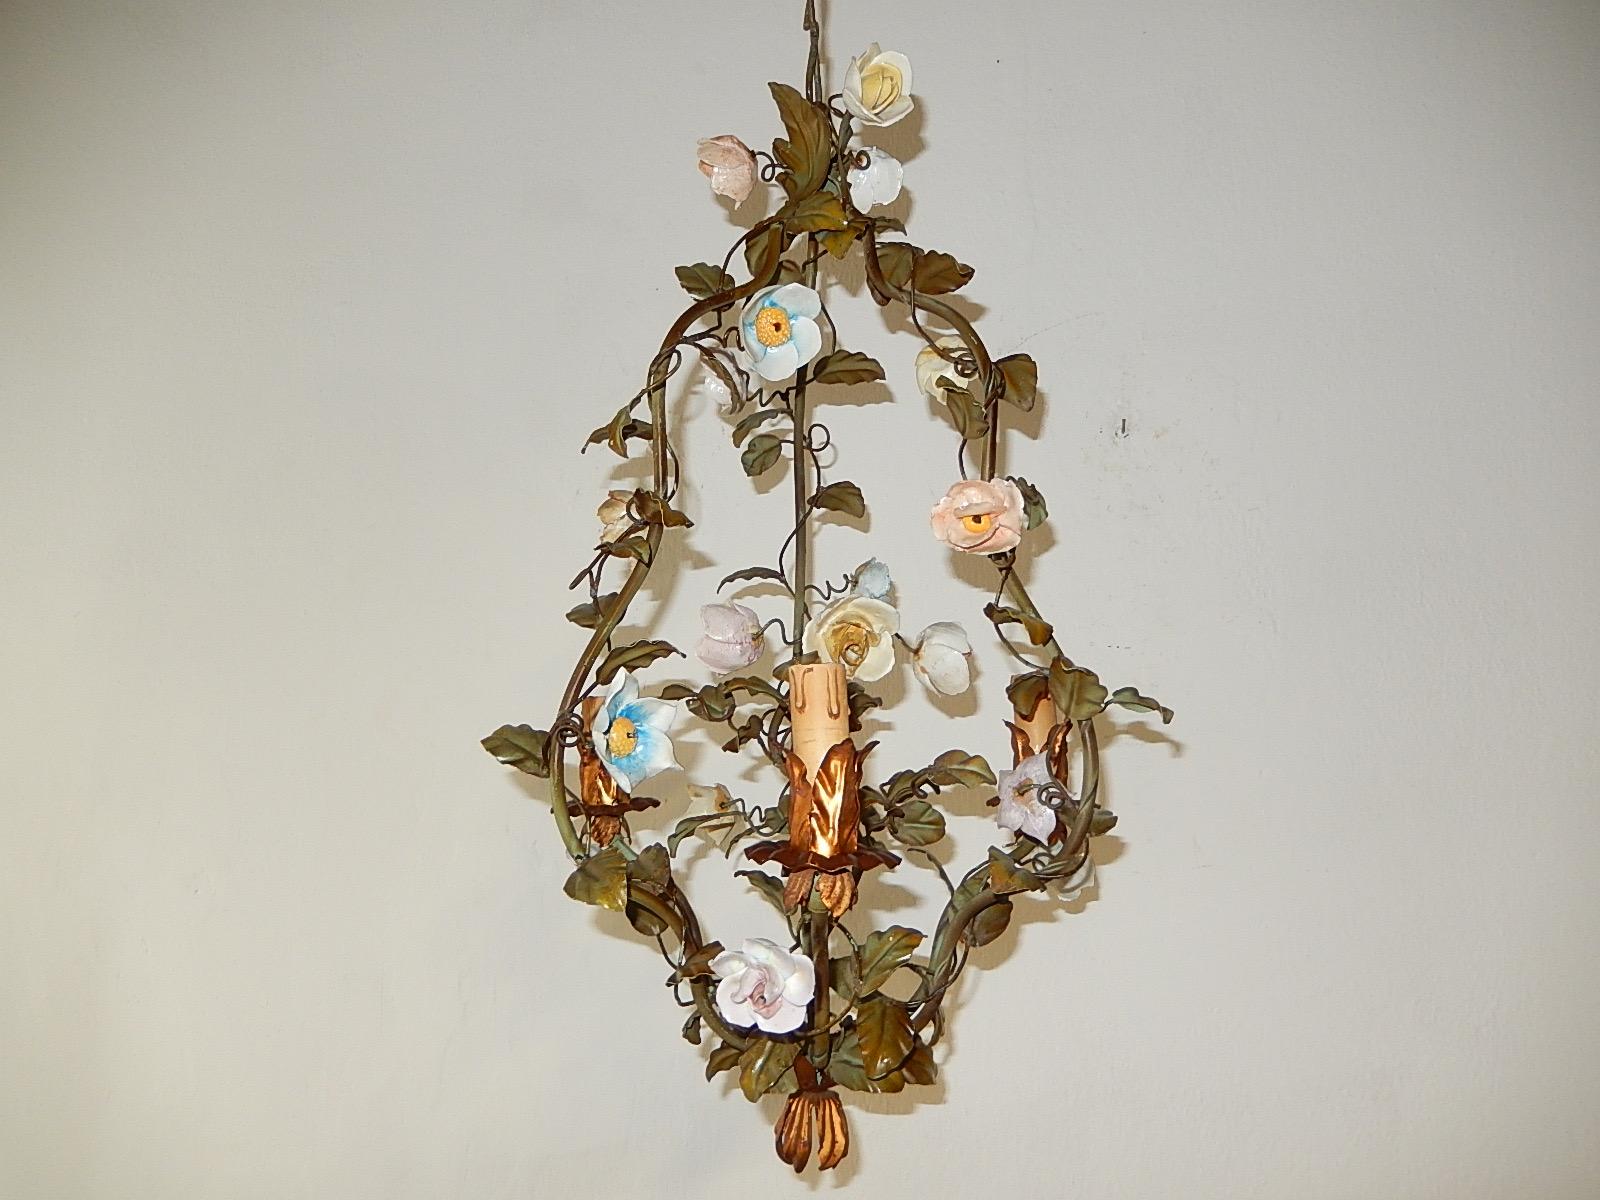 Housing five lights. Will be rewired and sockets for appropriate country. Original color tole with gold bulb holders. Handmade porcelain flowers, one petal broke and only flea bites. Adding 14 inches of original rare chain and gold canopy. Free